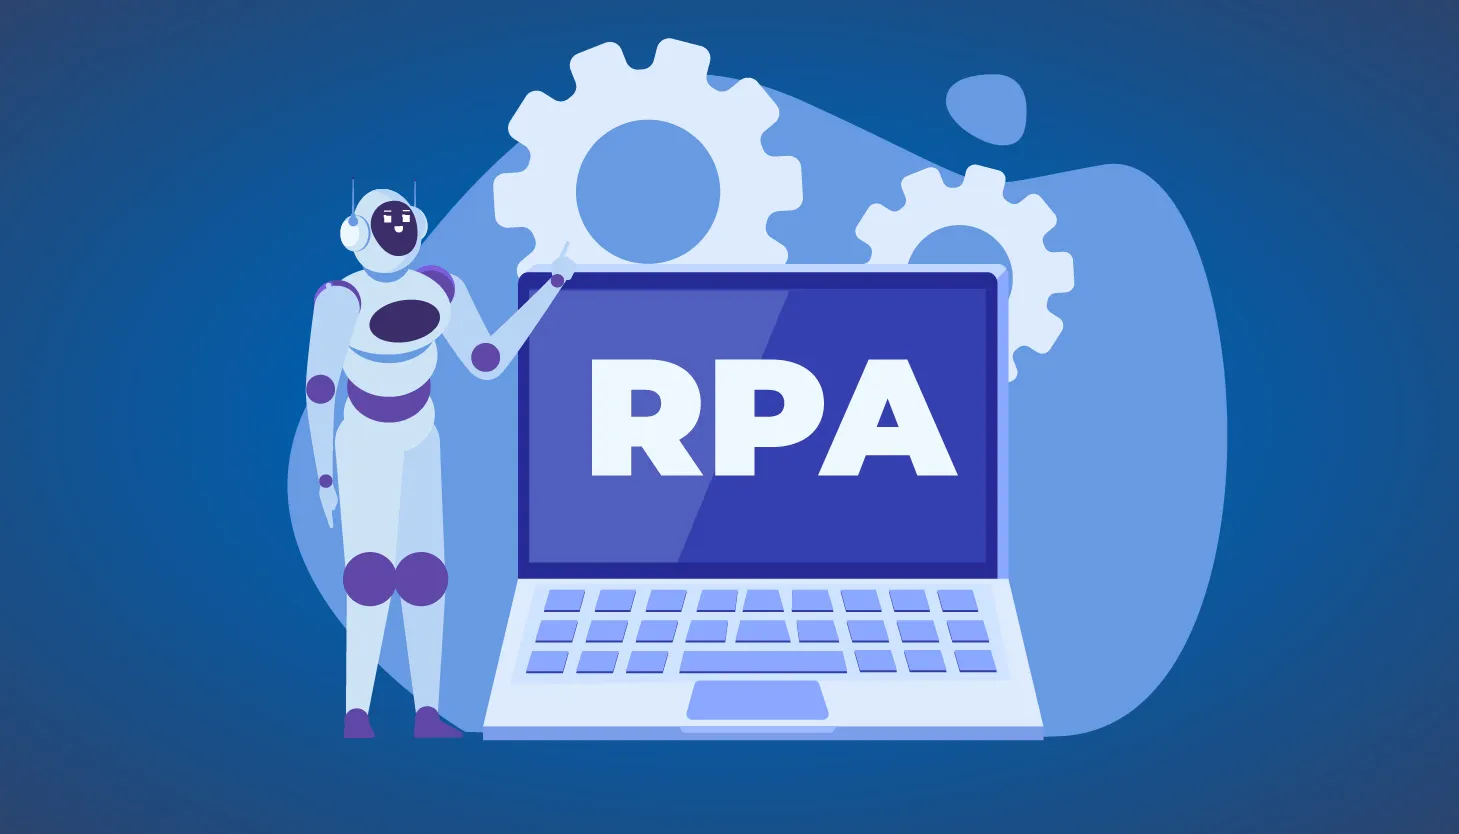 RPA involves the use of robots